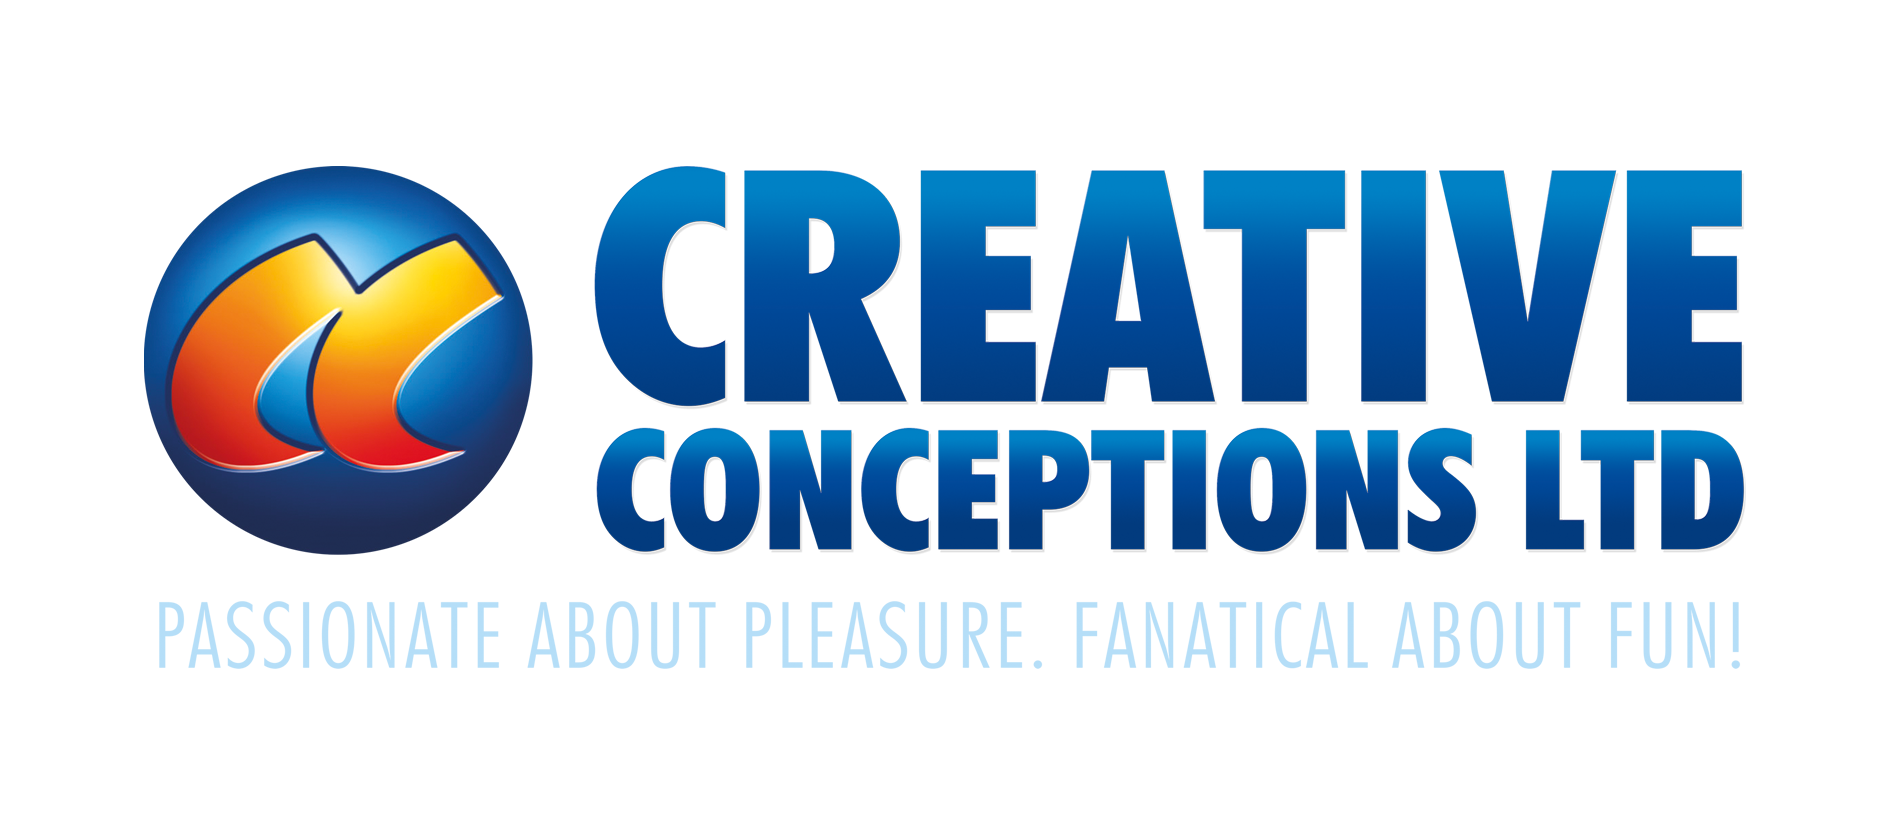 CONCEPTIONS CREATIVES